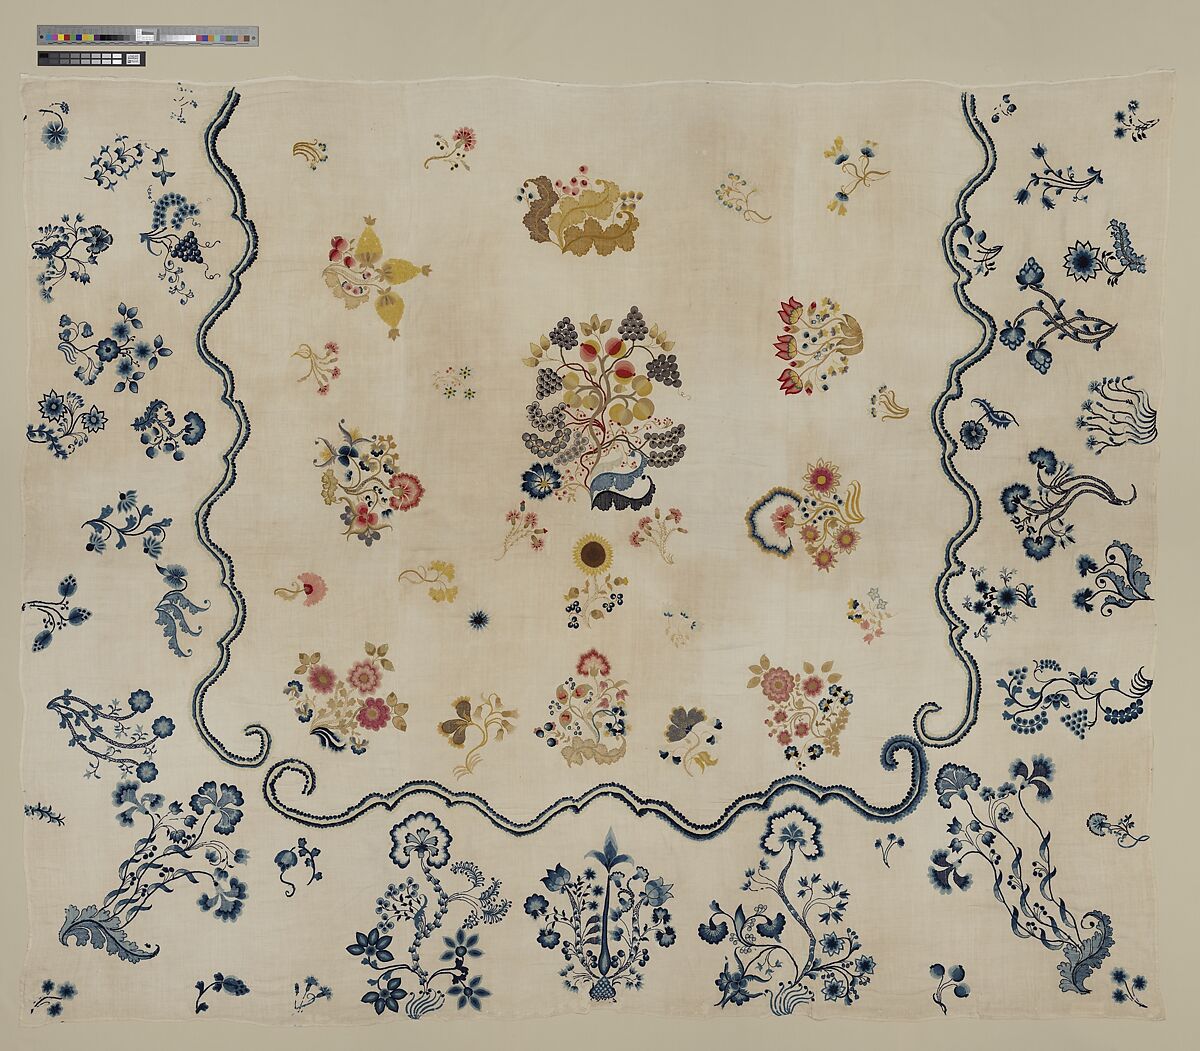 Embroidered coverlet, Ruth Culver Coleman (died 1801), Linen and wool, embroidered, American 